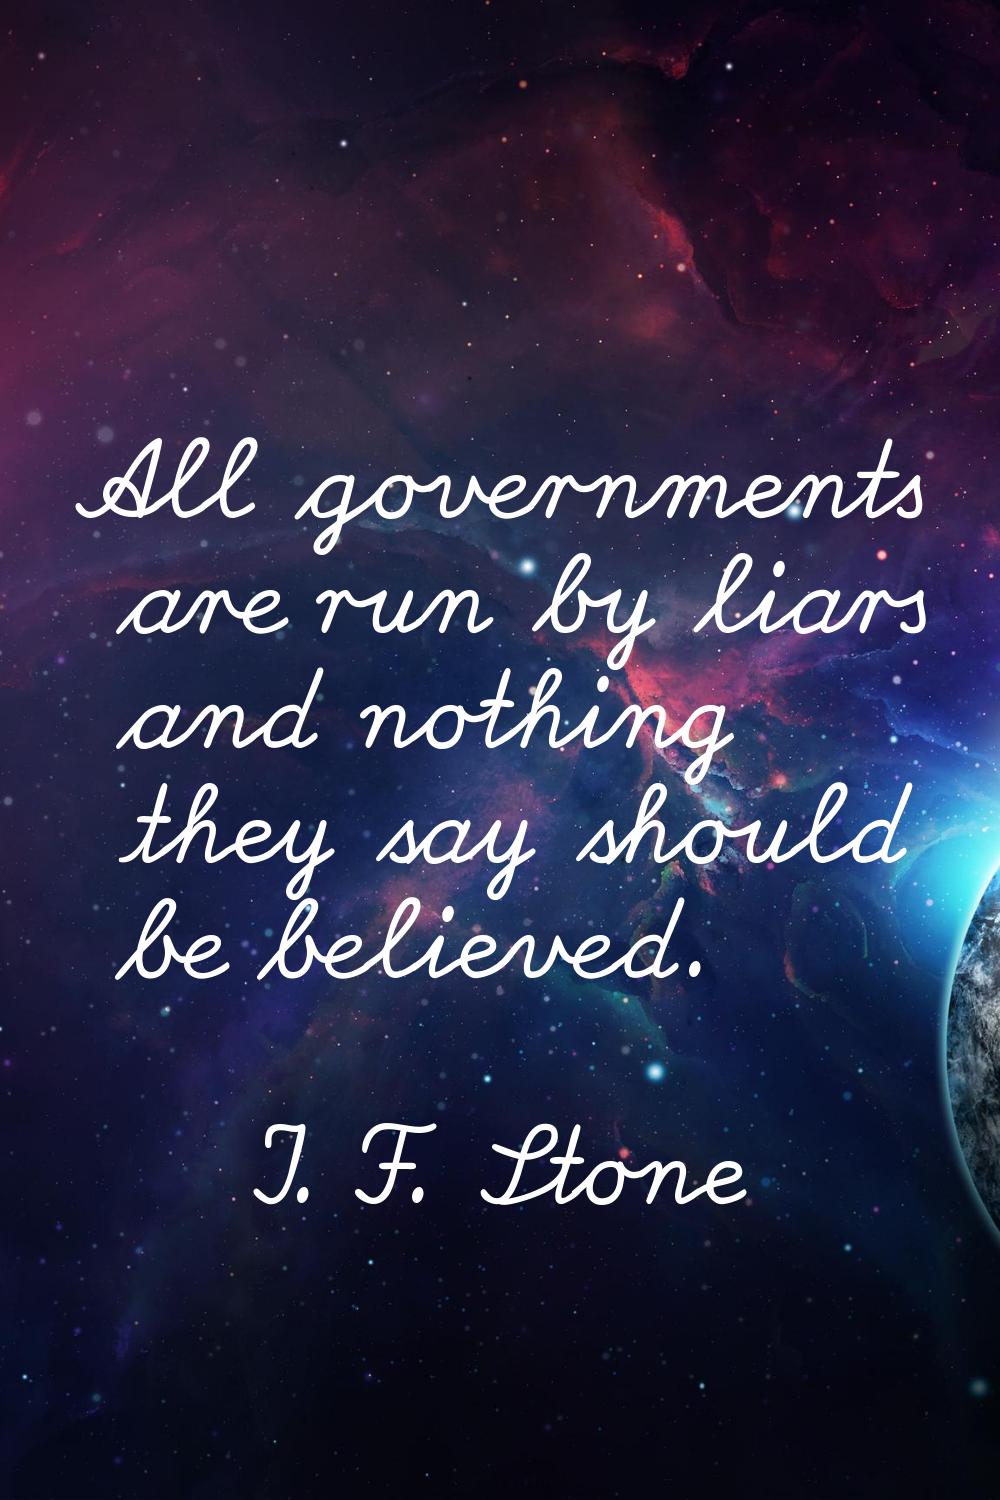 All governments are run by liars and nothing they say should be believed.